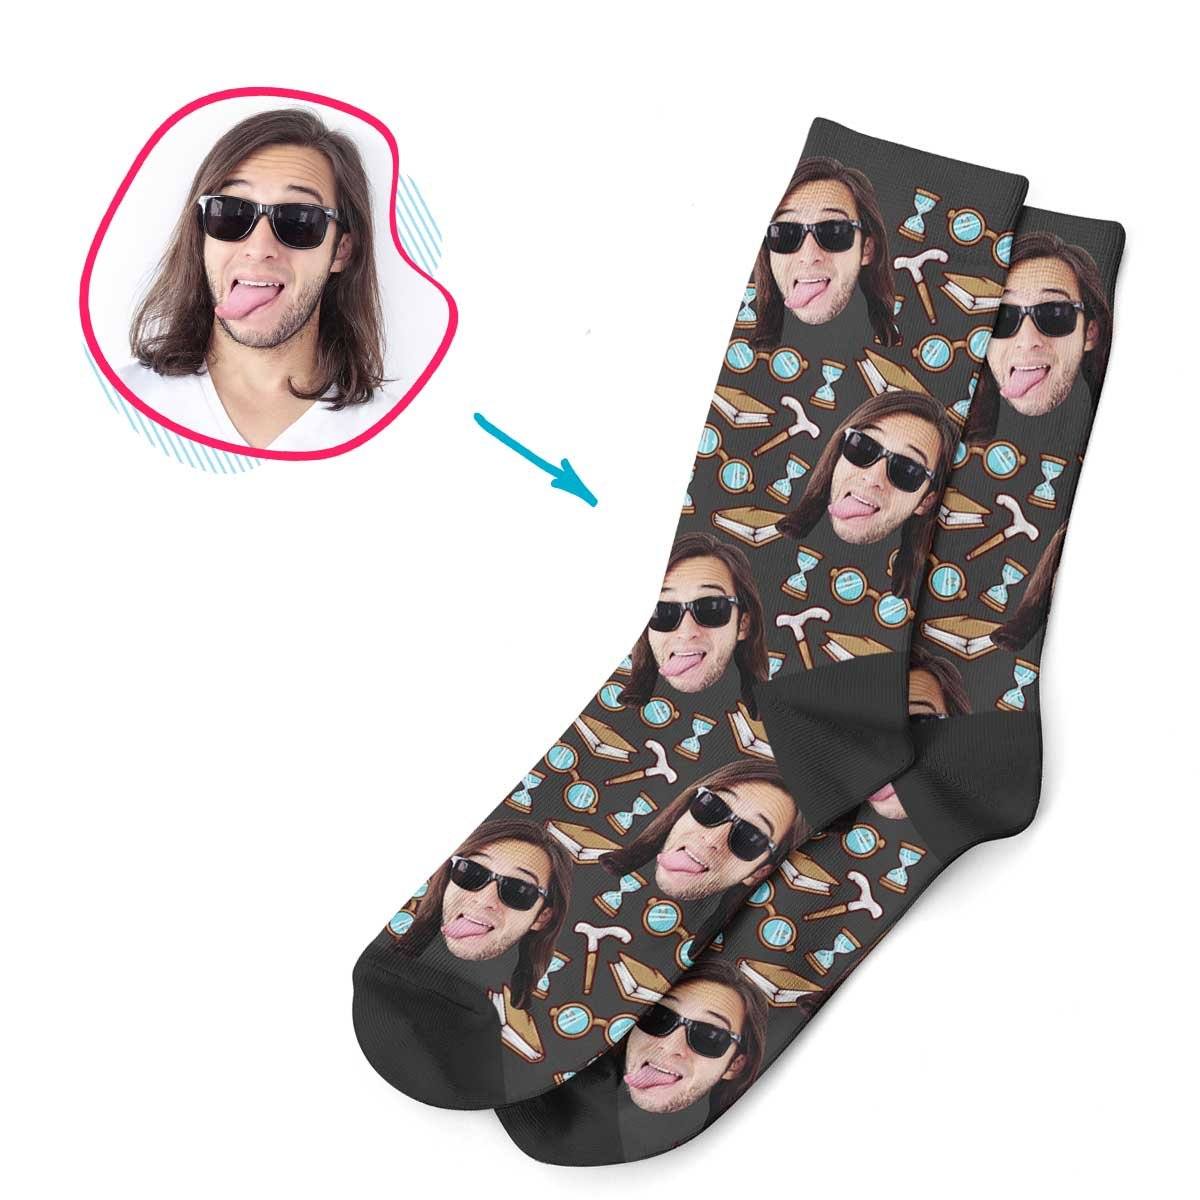 Dark Retirement personalized socks with photo of face printed on them